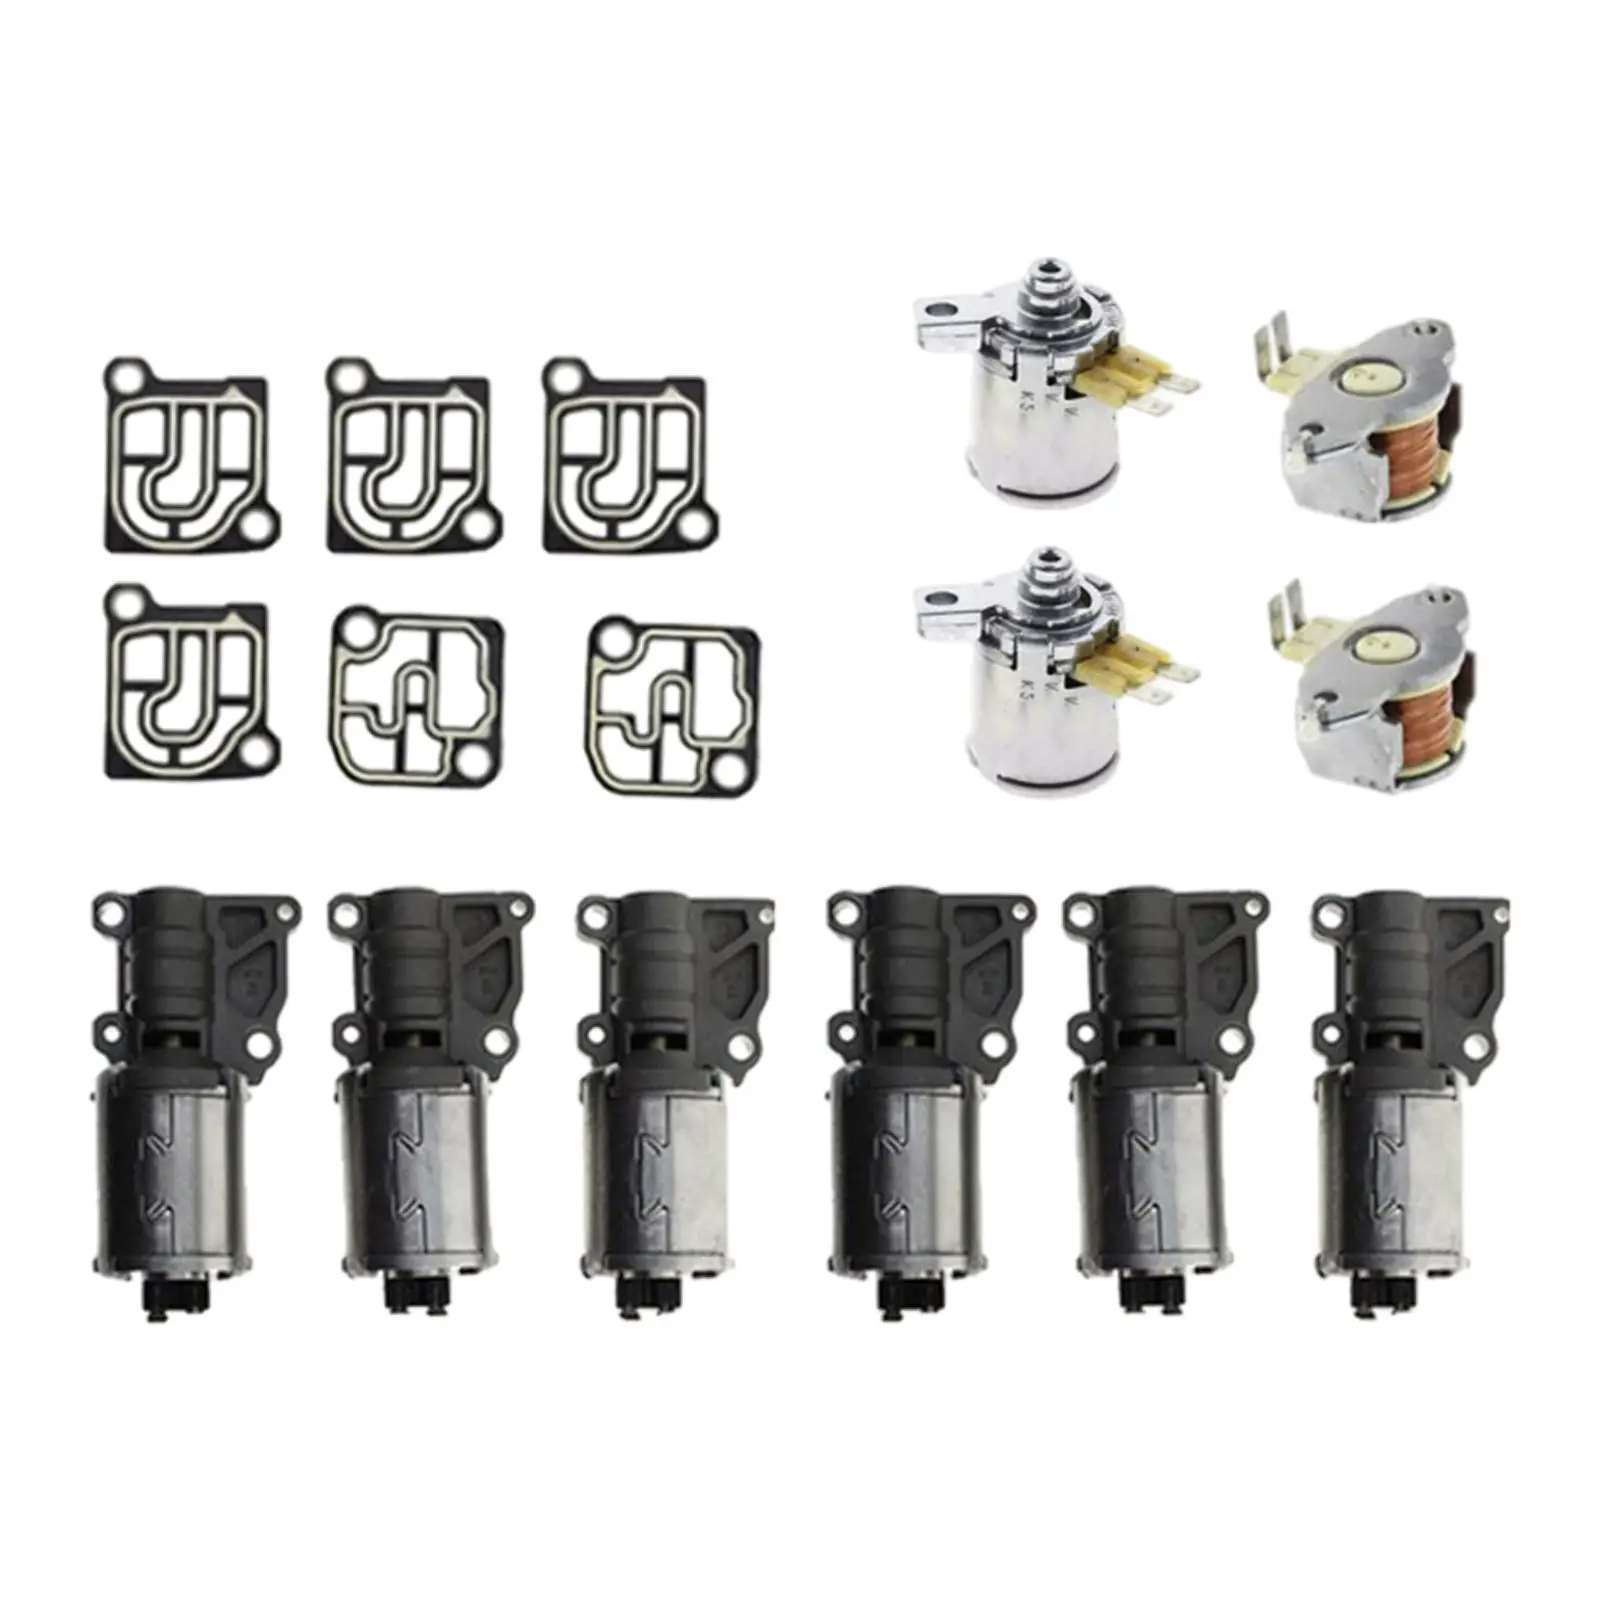 0B5 DL501 Transmission Solenoids Valve Set Compatible for Audi A4 S4 A5 S5 A6 A7 Q5 DQ500 with Circed Boards